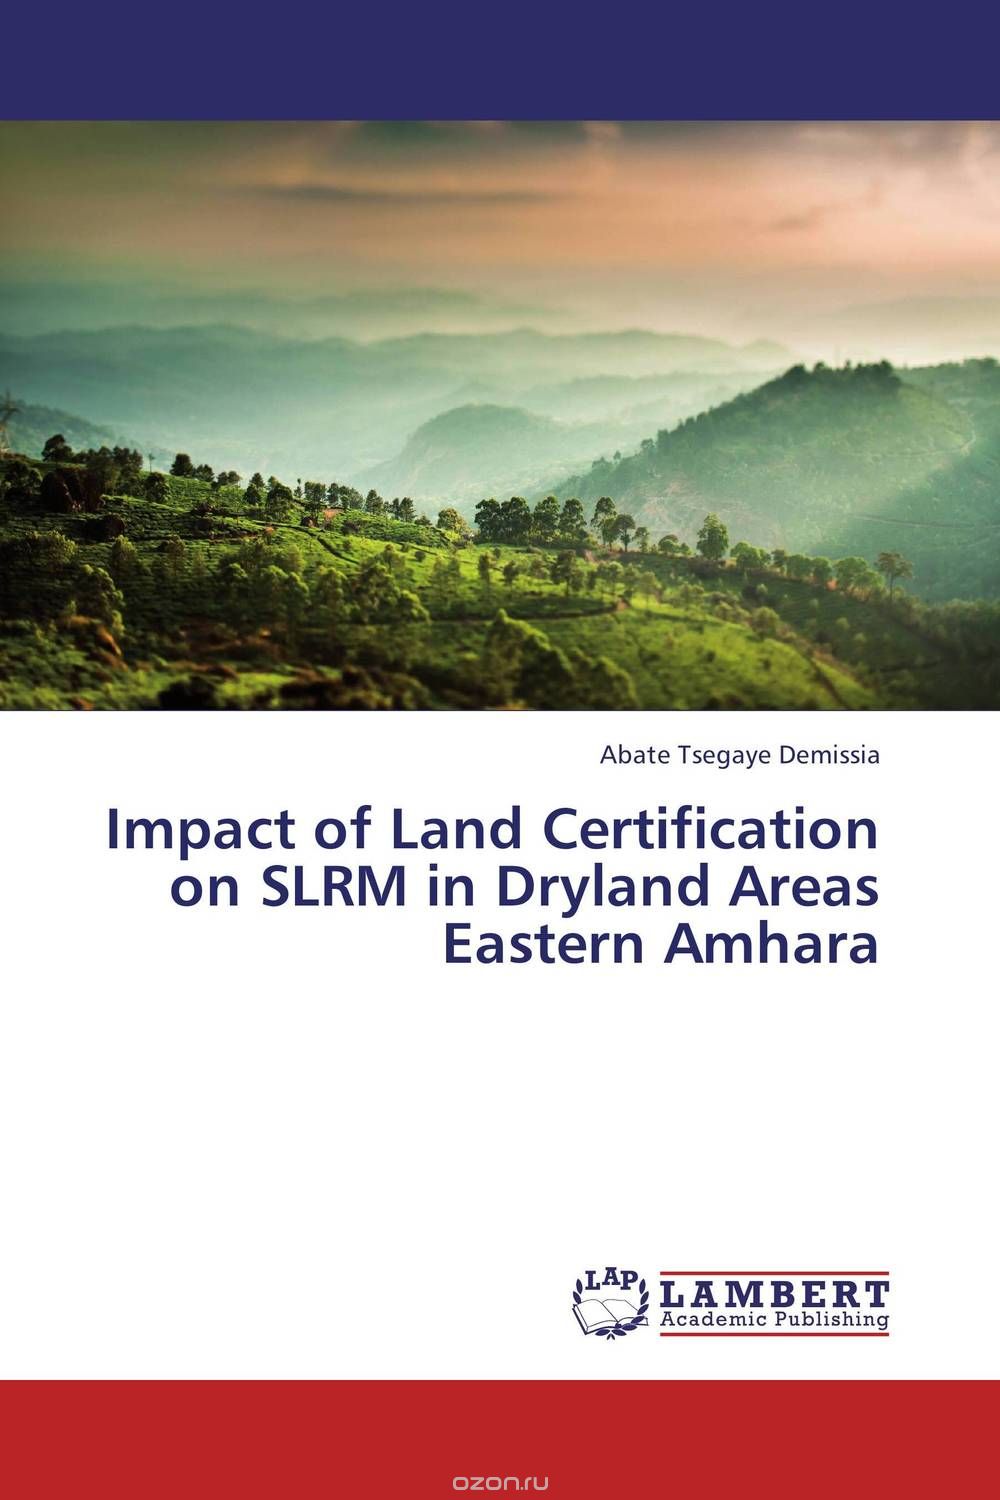 Impact of Land Certification on SLRM in Dryland Areas Eastern Amhara